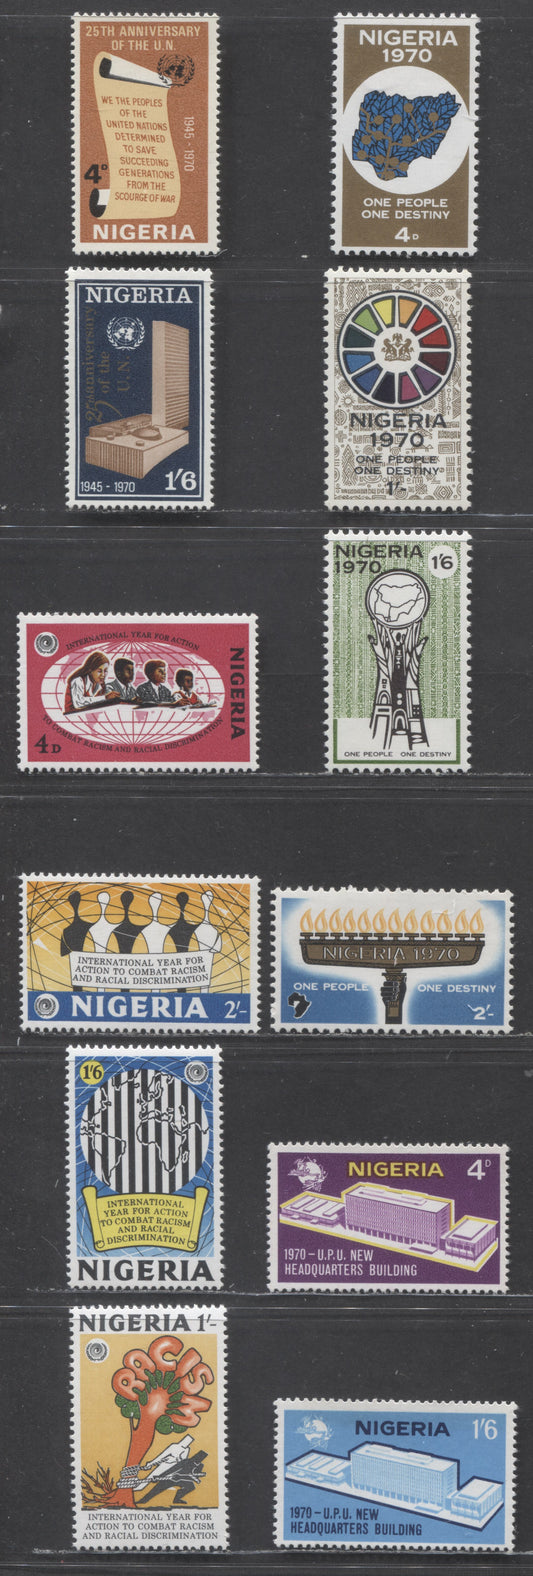 Nigeria SC#235/254 1970-1971 12 State Structure - Prevent Racism Issues, 12 VFNH Singles, Click on Listing to See ALL Pictures, 2022 Scott Classic Cat. $3.25 USD